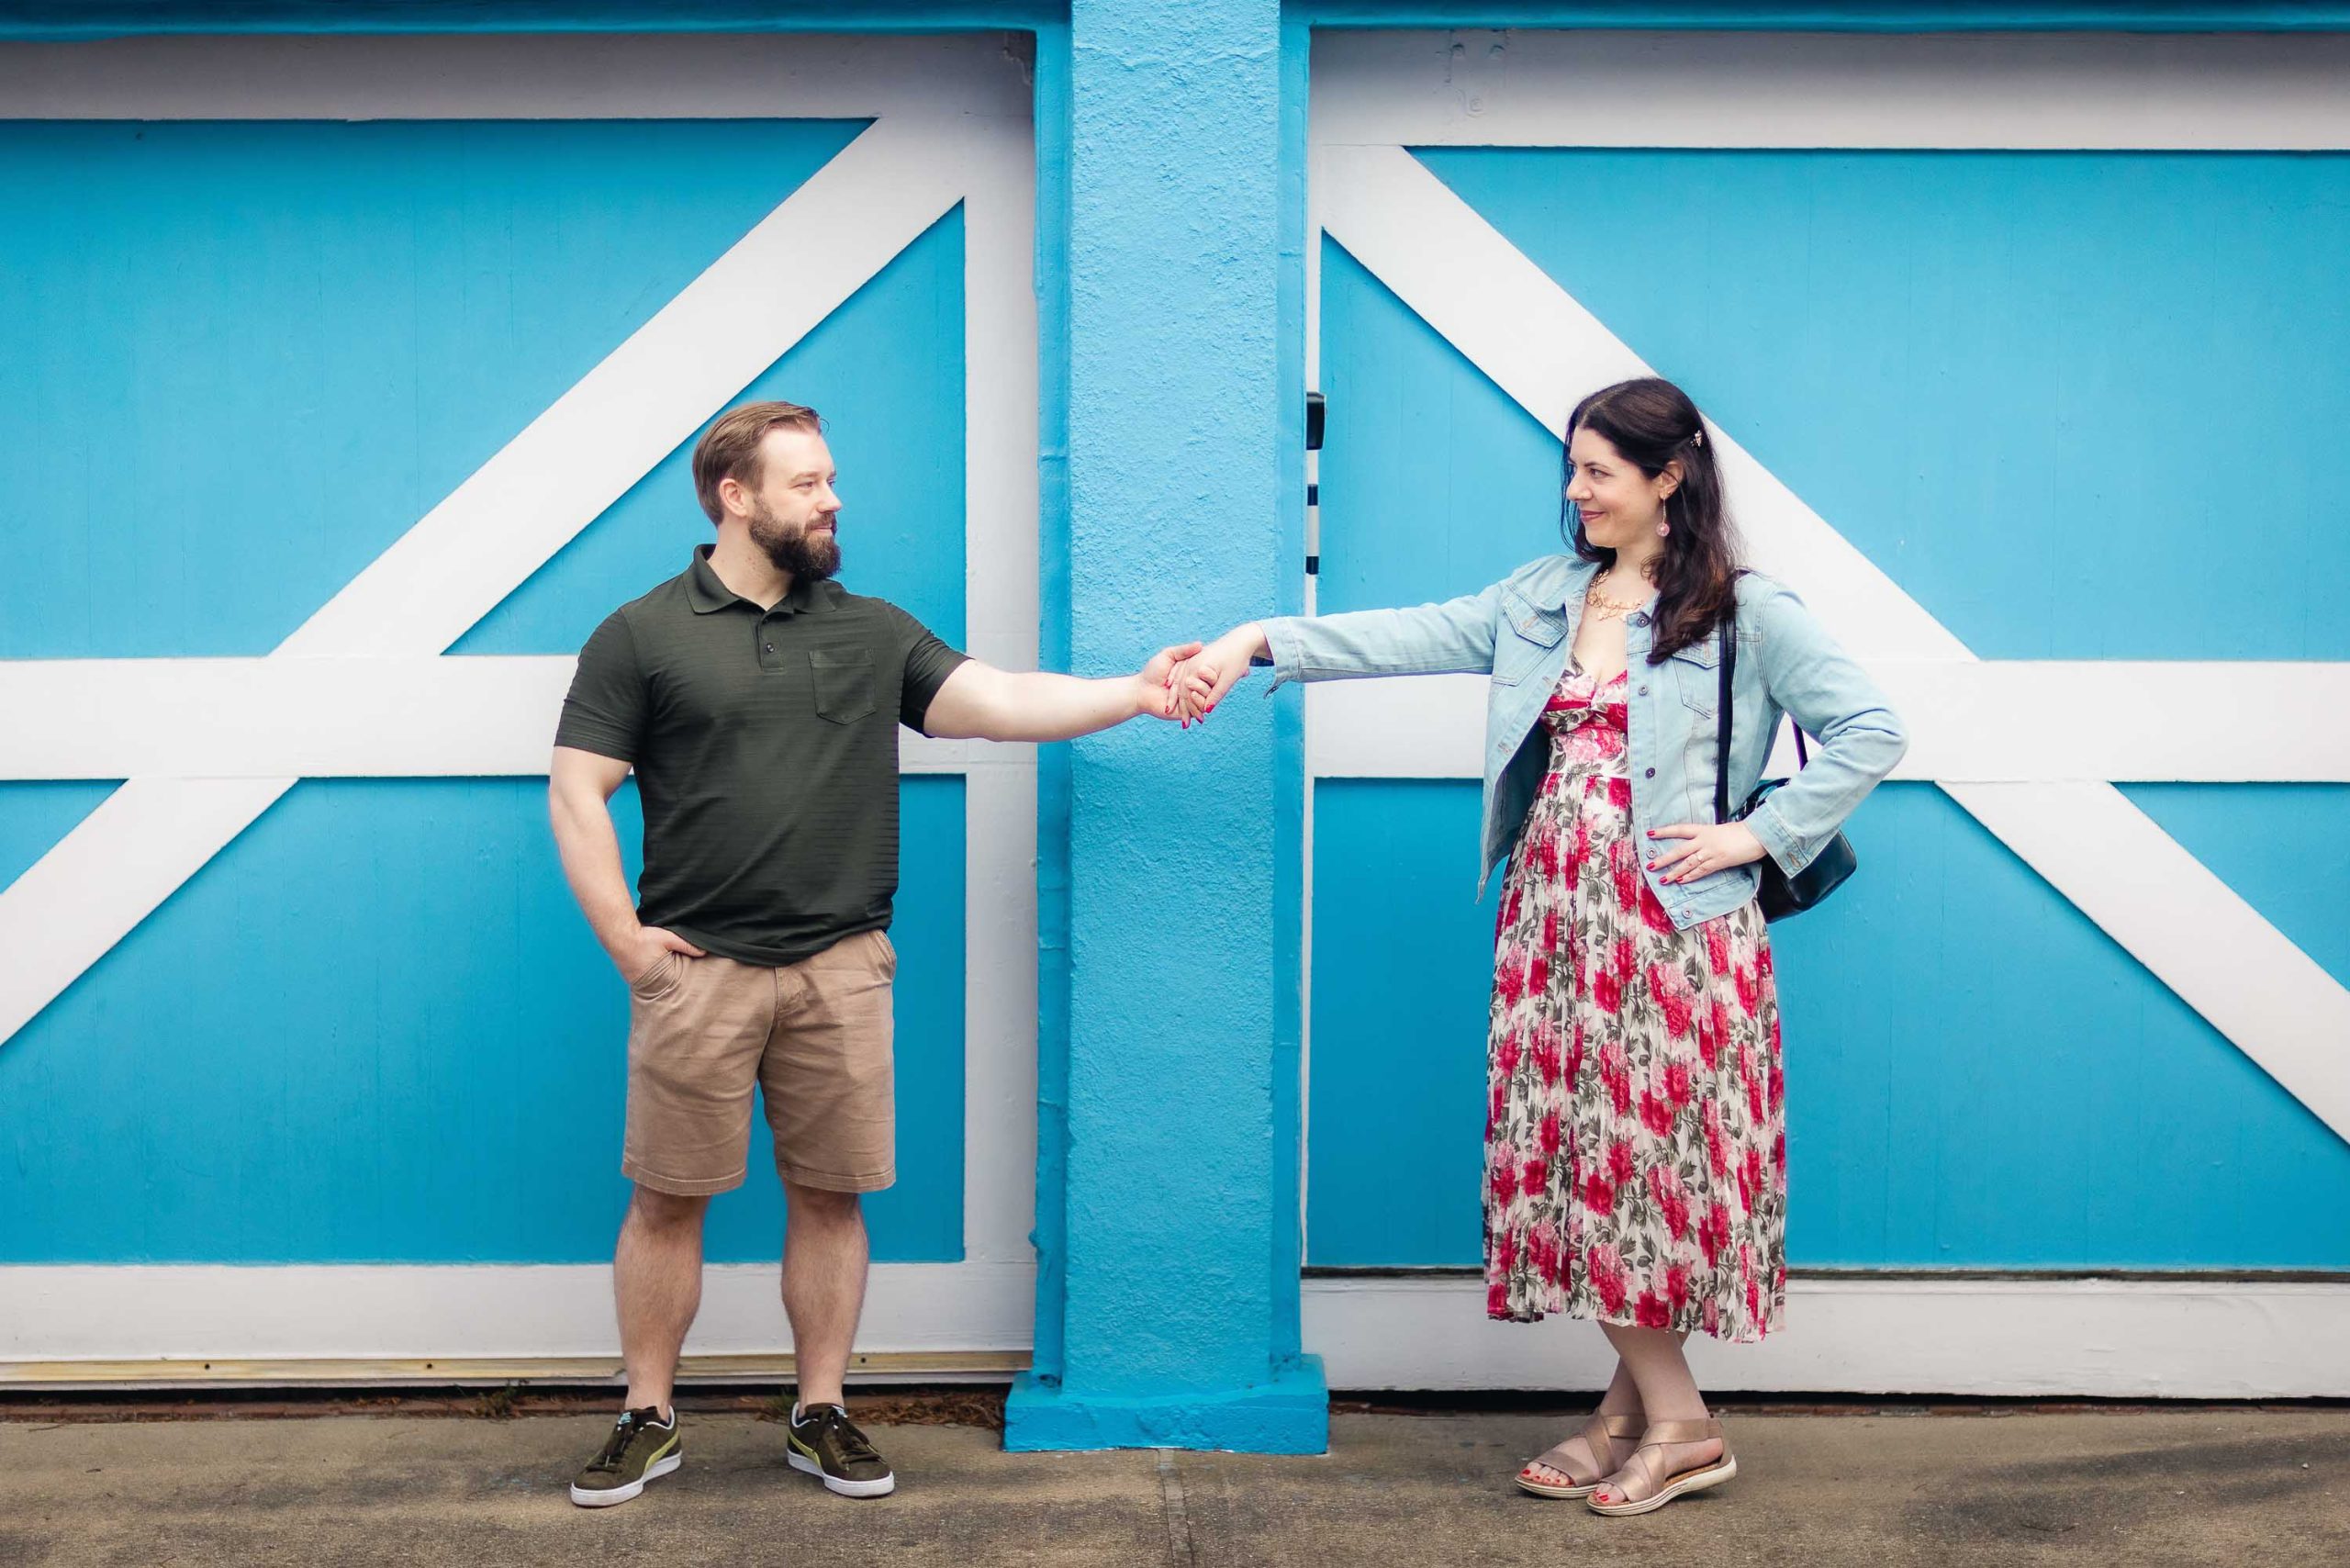 A man and woman, captured in a casual portrait, shake hands in front of a blue garage door.